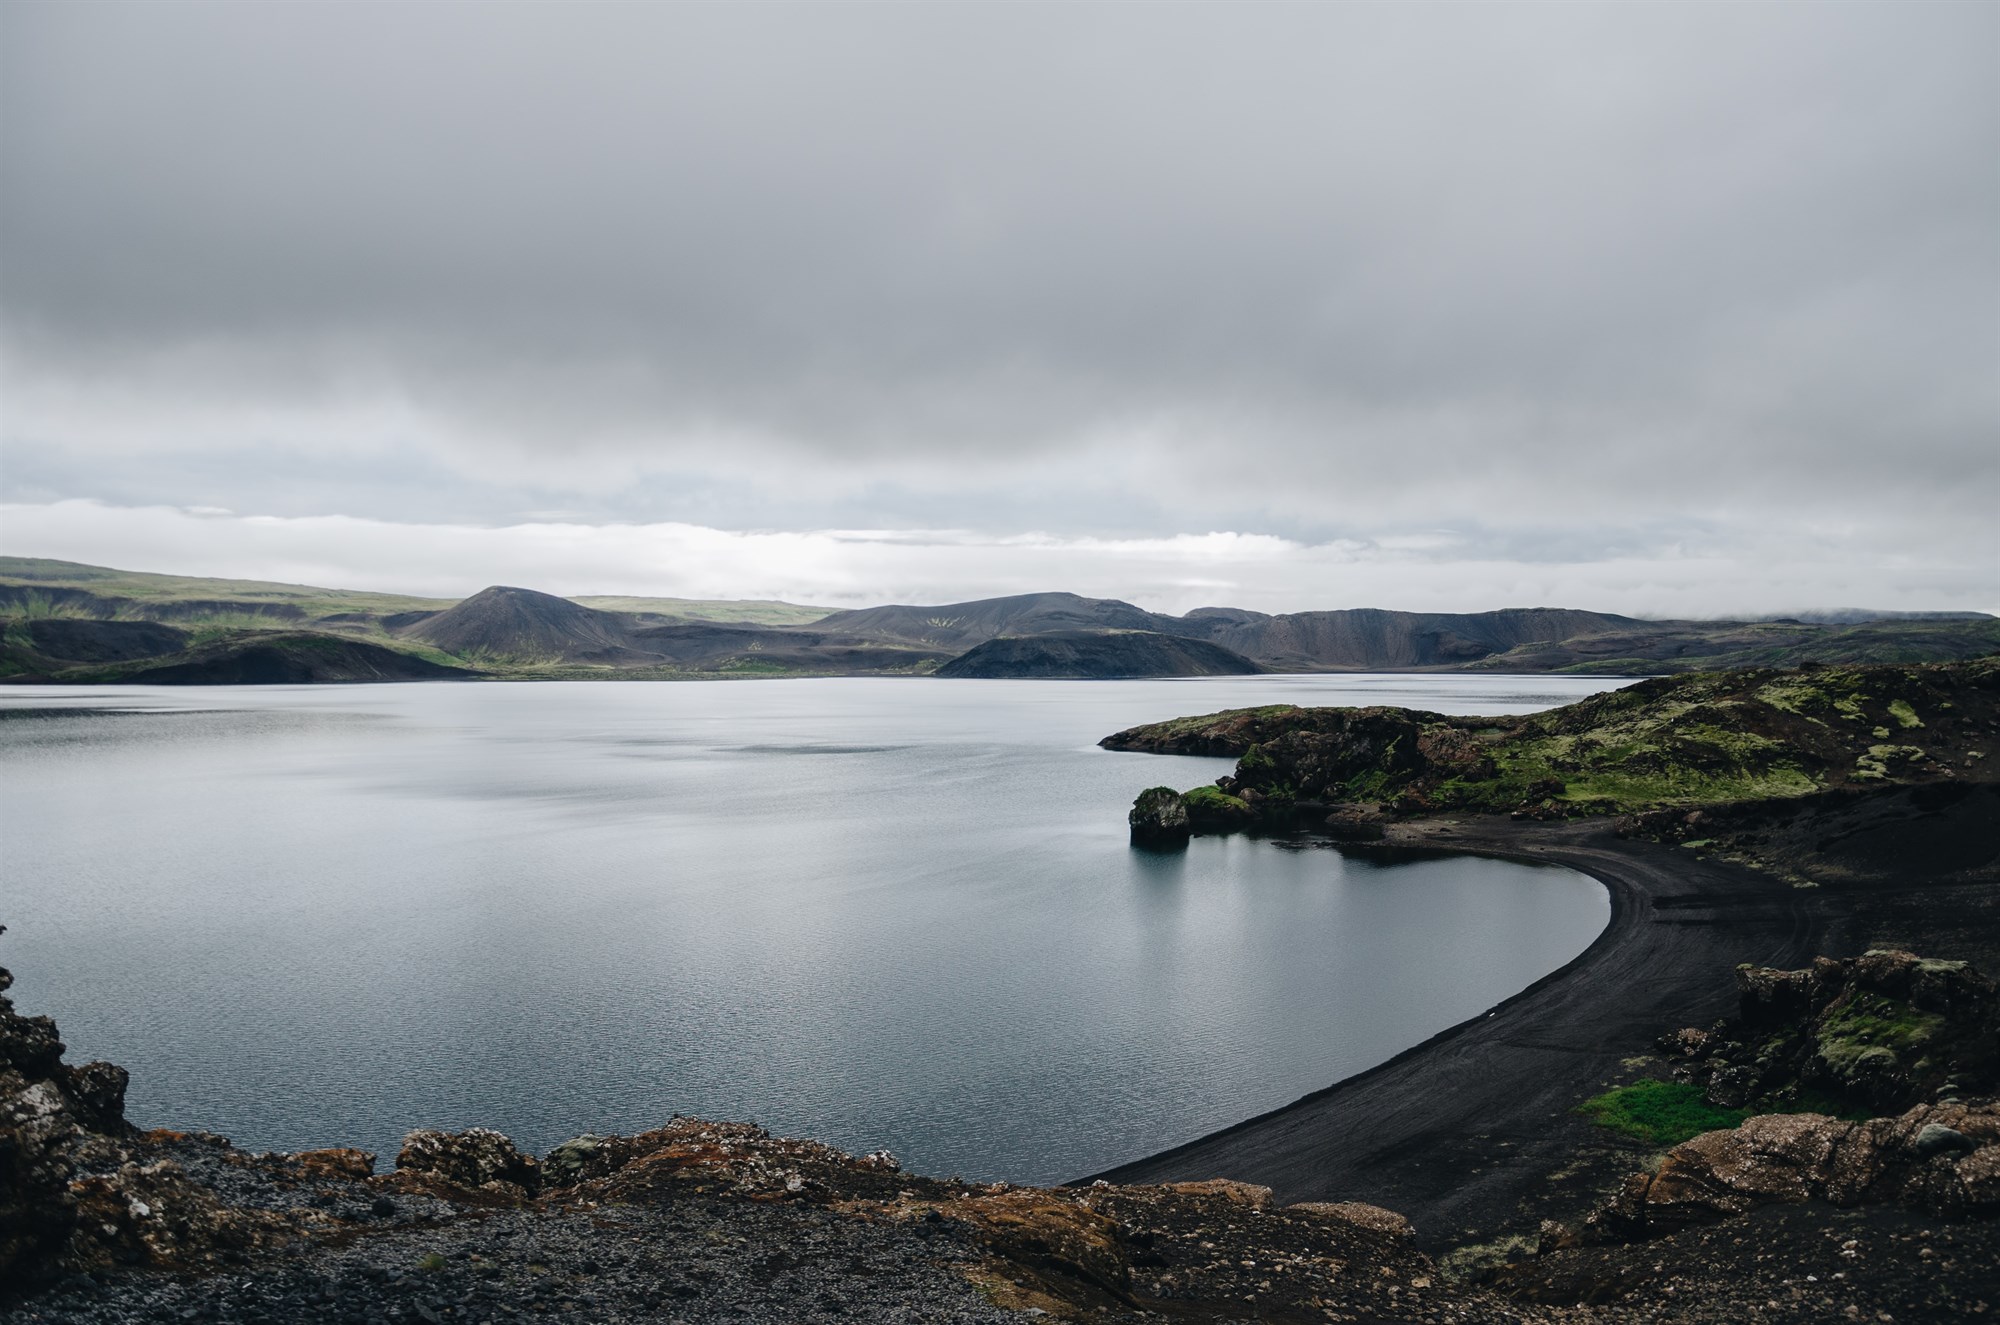 Rocky outcrops and black sand beach around Lake Kleifarvatn in Iceland.